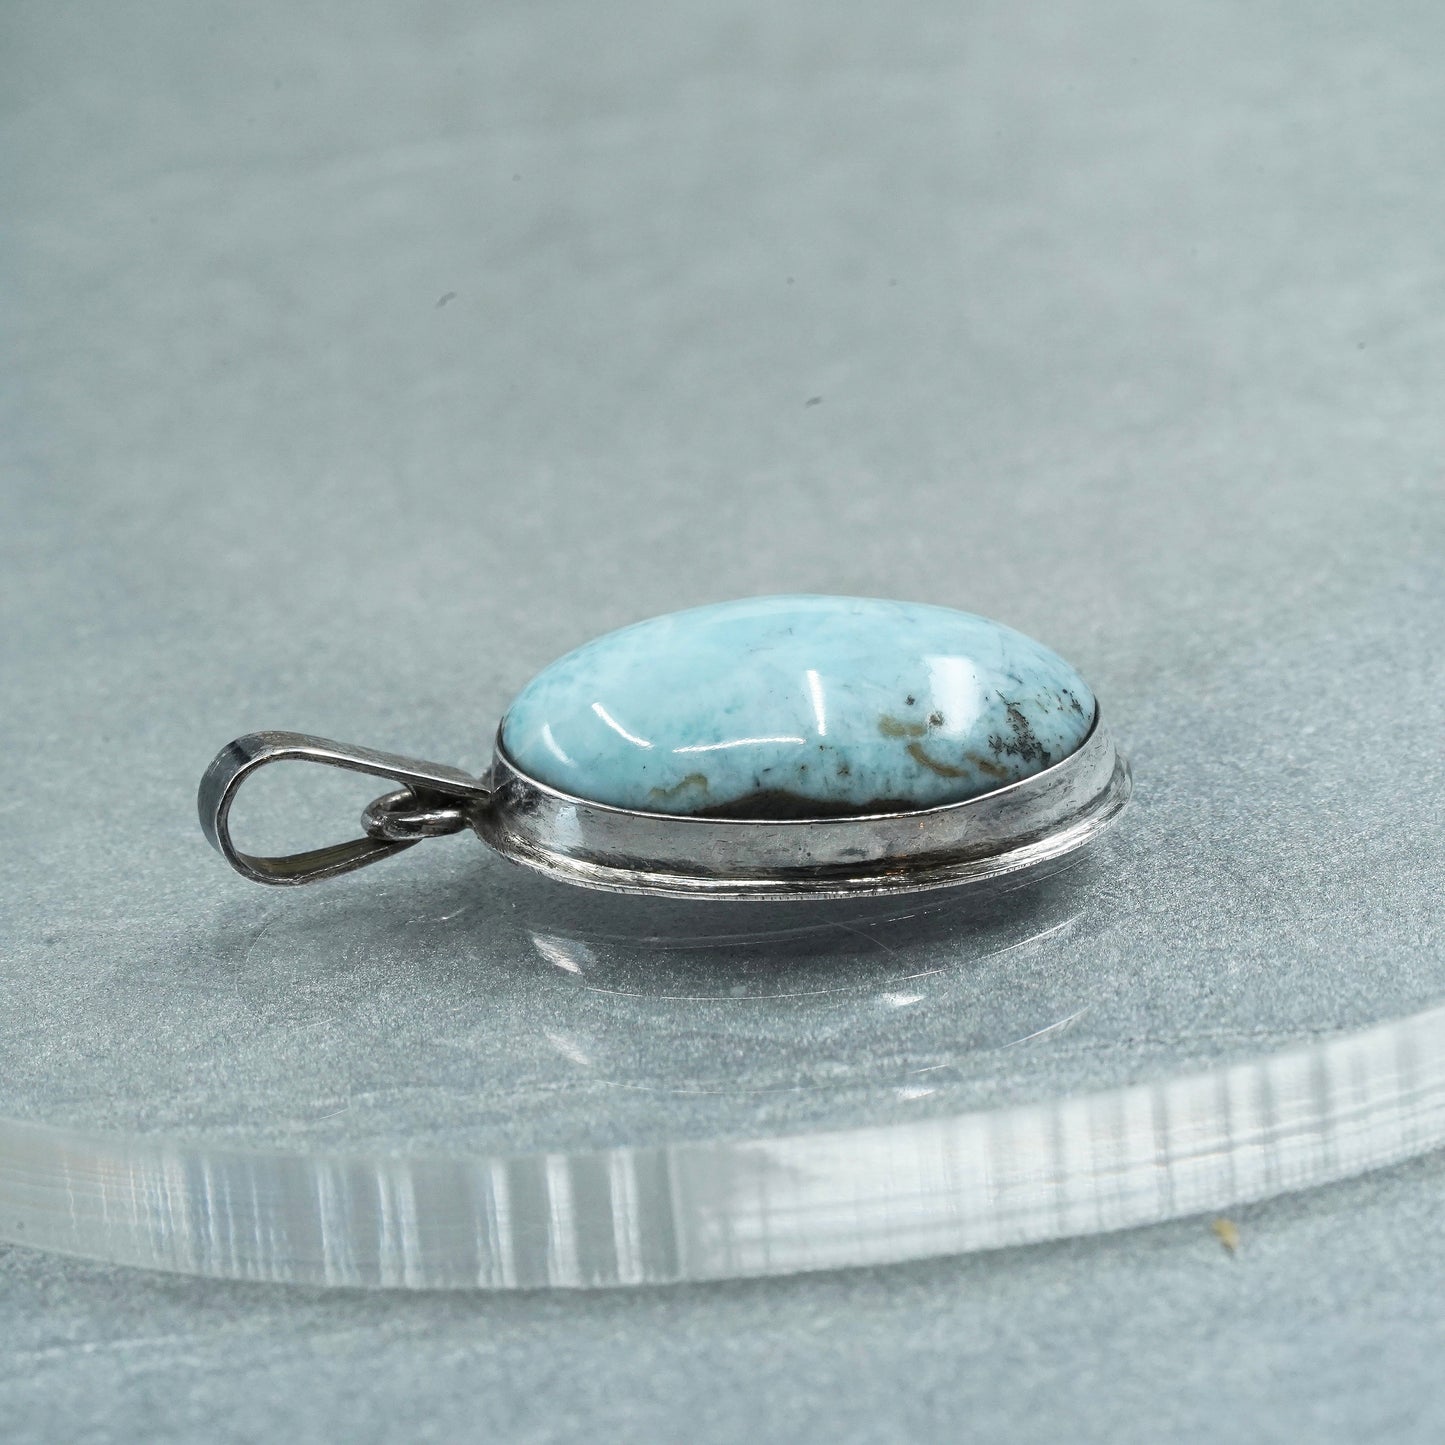 vintage sterling 950 silver handmade pendant with oval Larimar